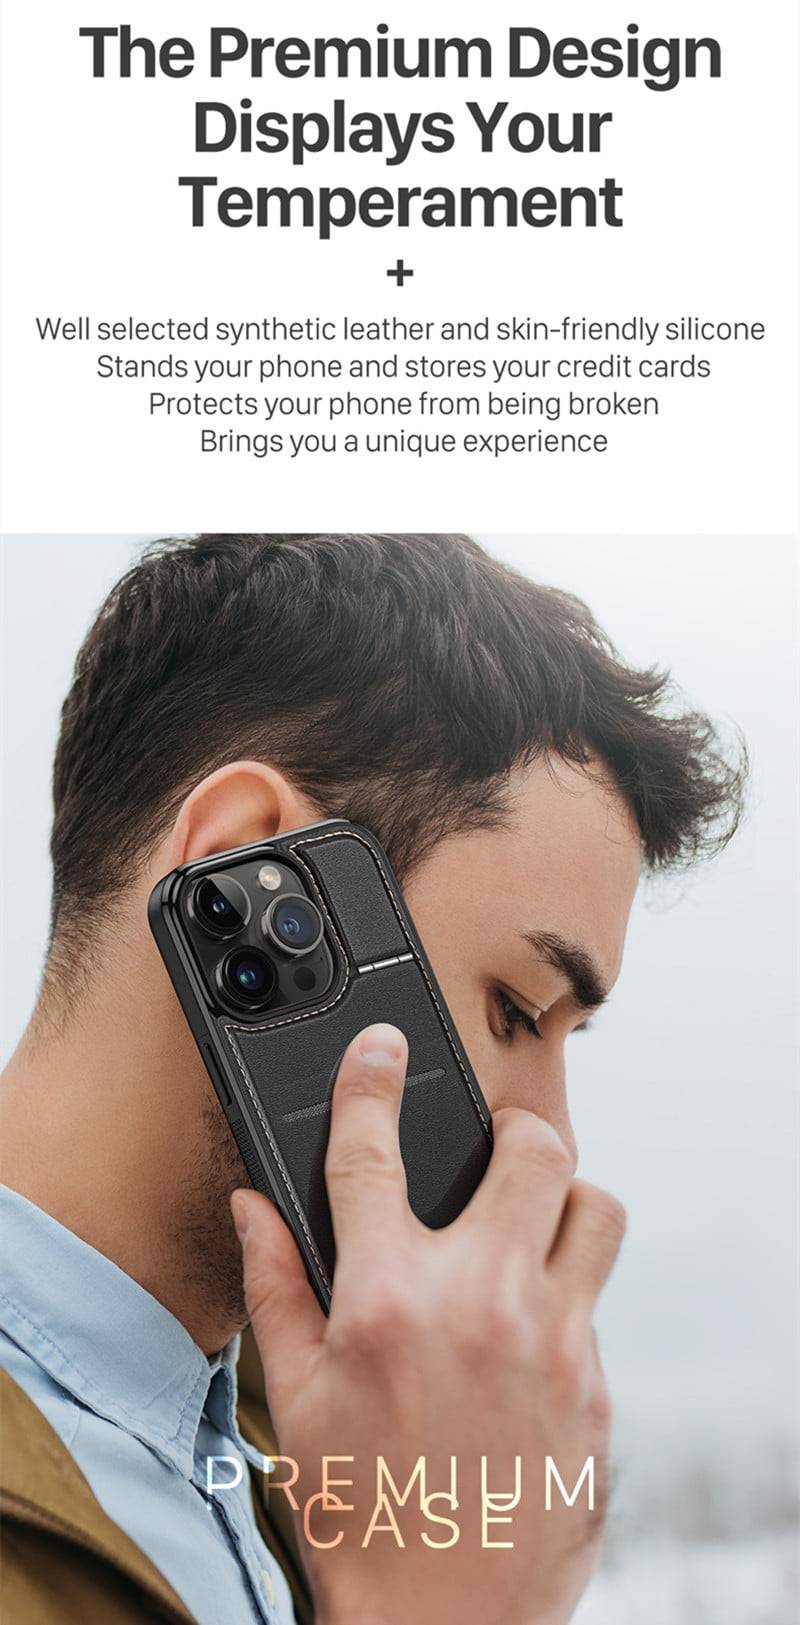 ShiftCam Multi-Lens Case for the iPhone 11 Series